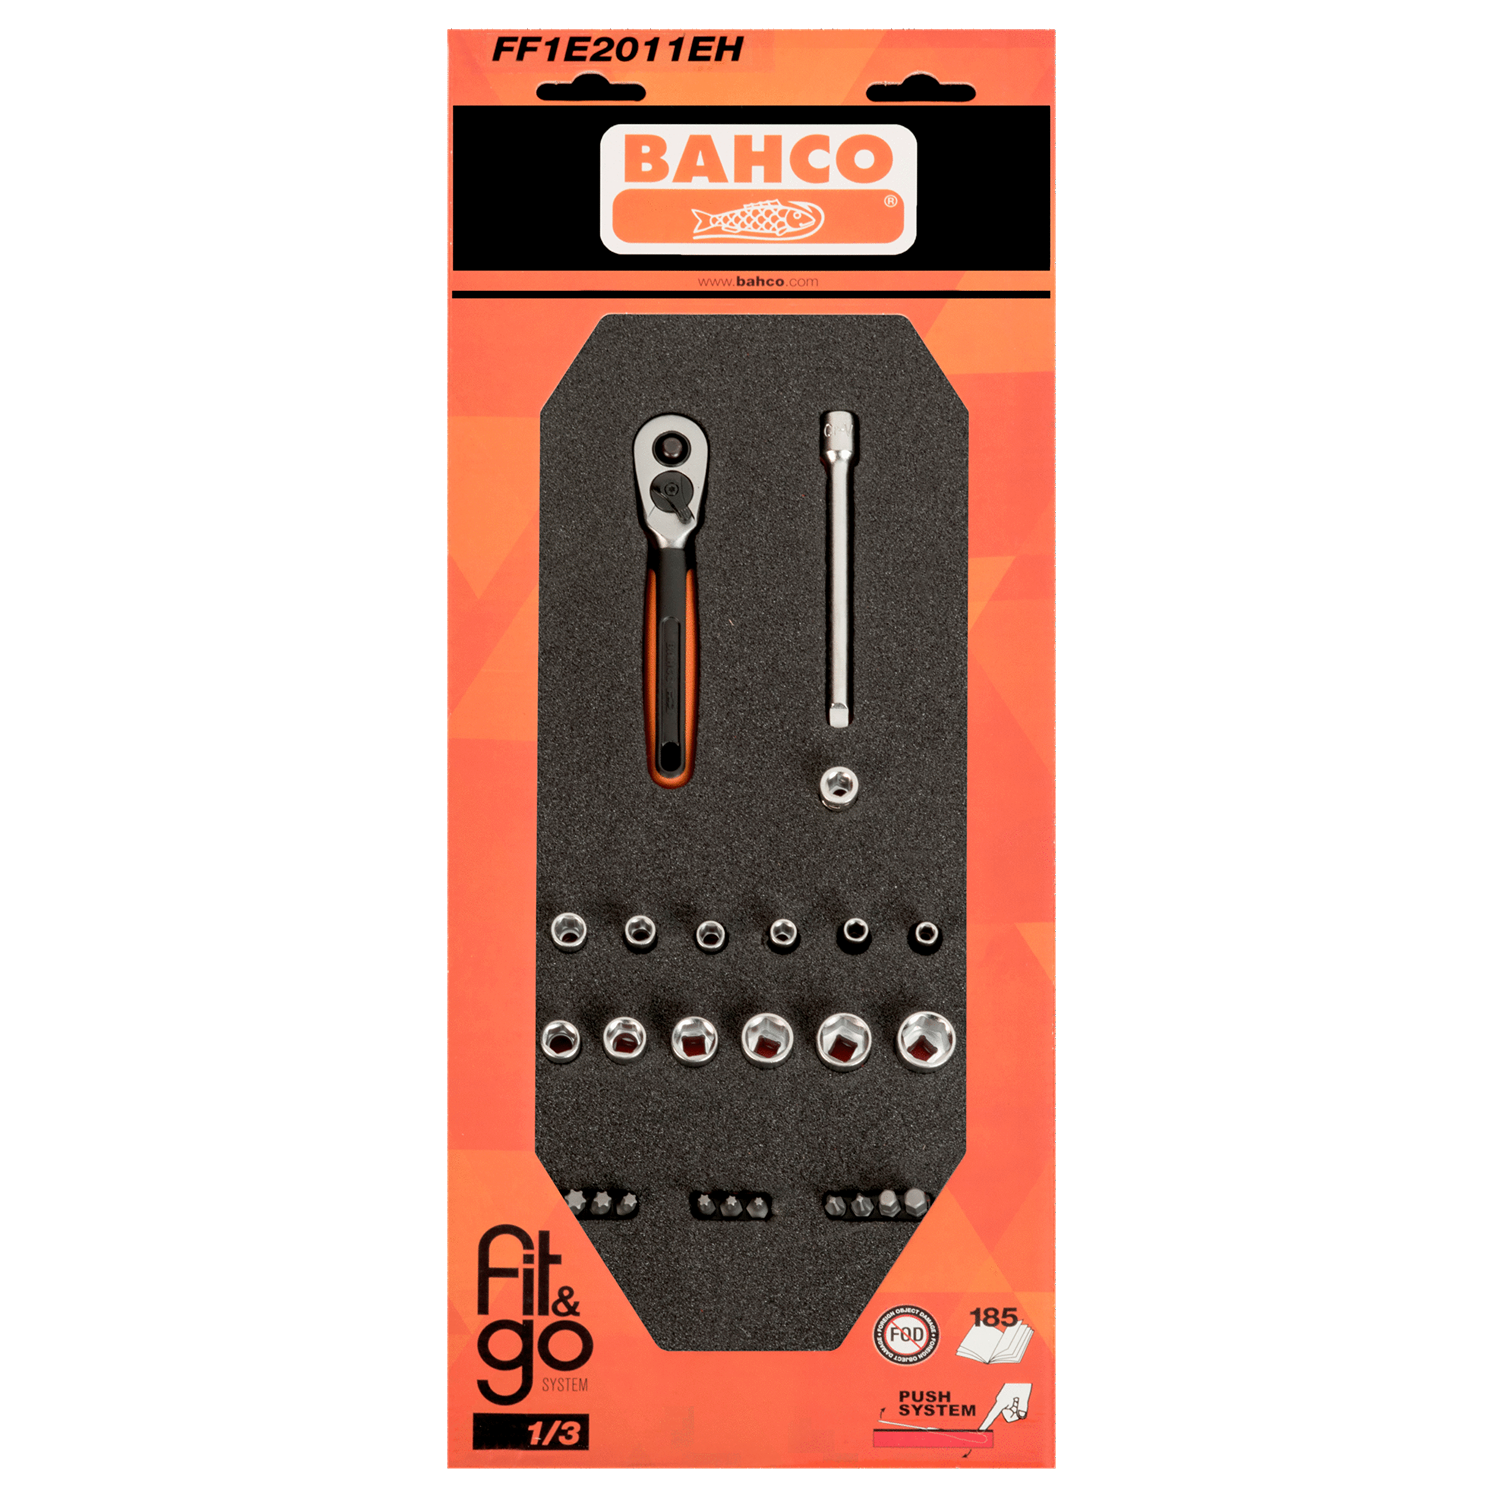 BAHCO FF1E2011EH Fit&Go 1/3 Foam Inlay 1/4” Socket Set - 25 pcs - Premium SOCKET SET from BAHCO - Shop now at Yew Aik.